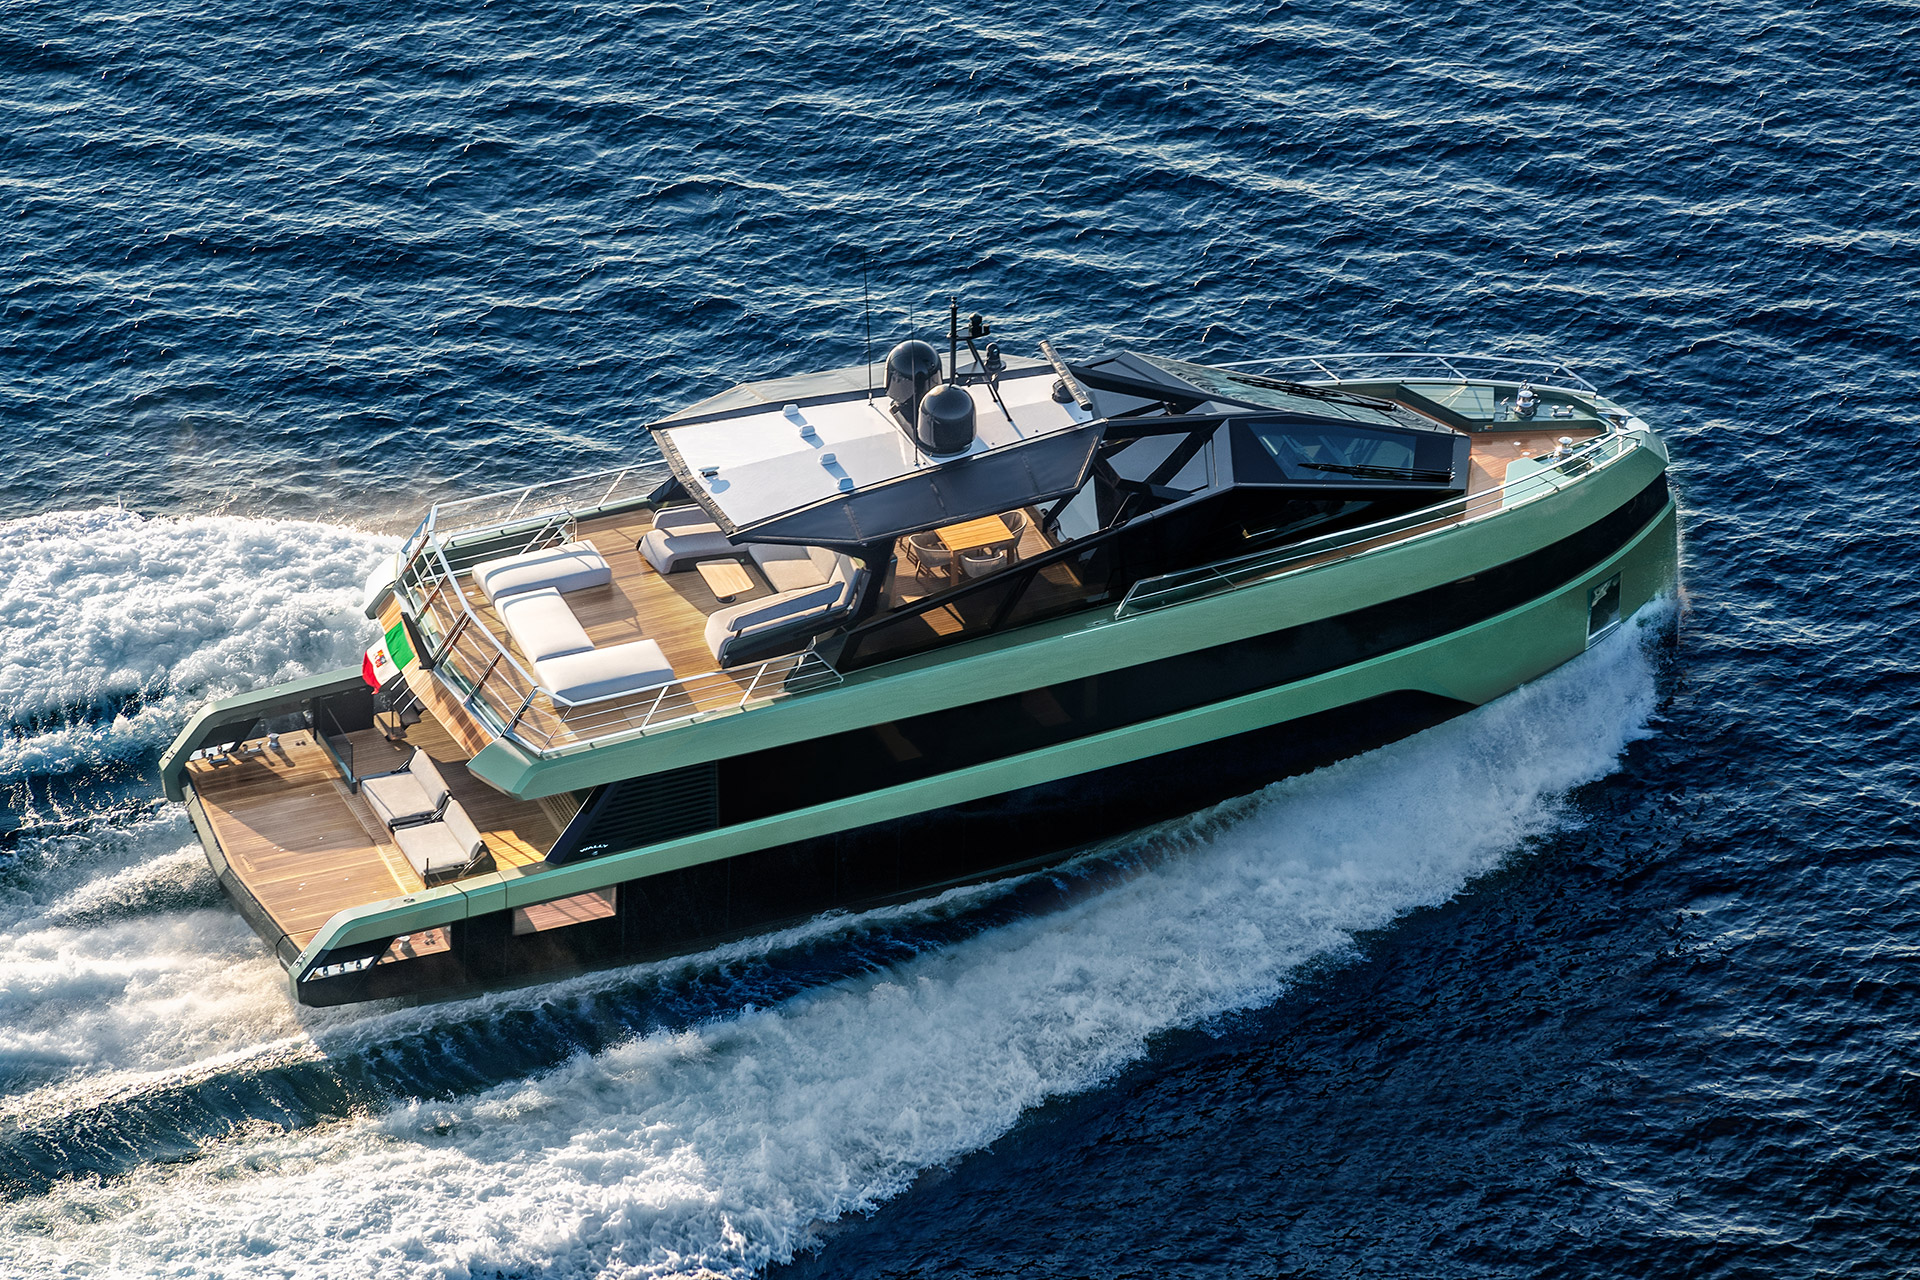 Wally wallywhy150 Yacht | Uncrate, #Wally #wallywhy150 #Yacht #Uncrate